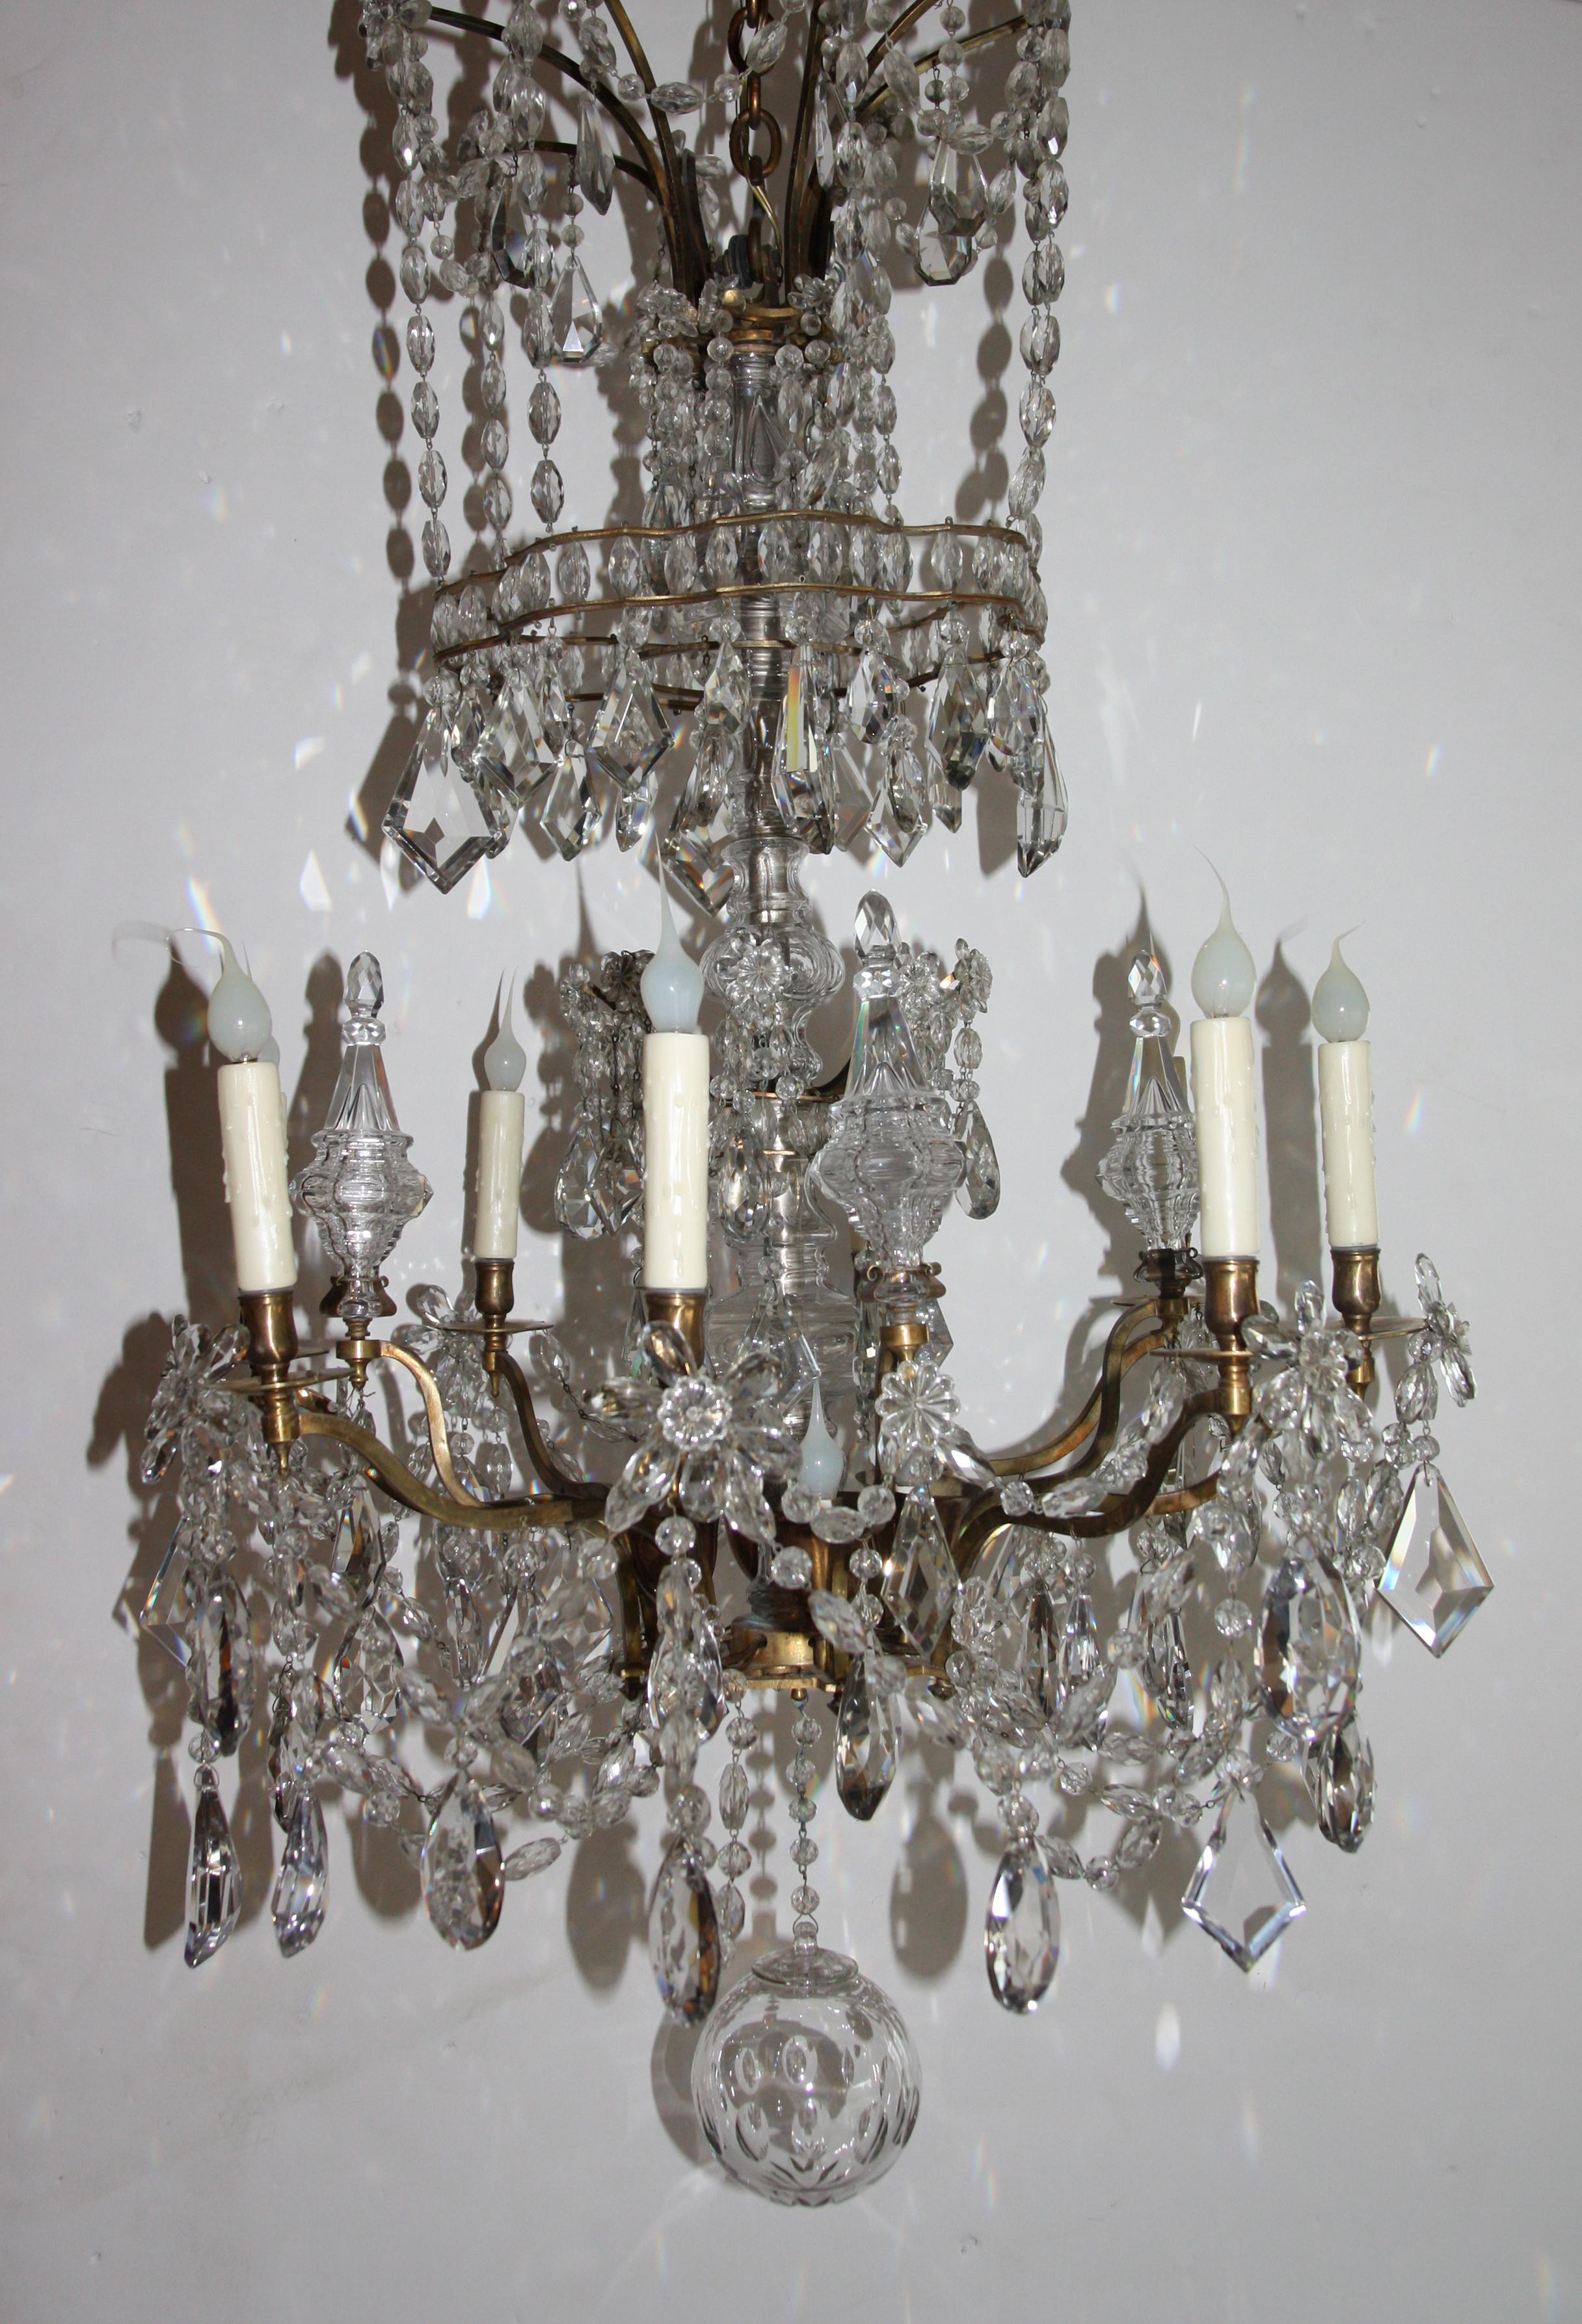 Monumental Louis XV chandelier in crystal and brass. Eight candle arms and 4 interior lights, prong-mounted crystal spires. Center rod encased in crystal. Assortment of clear cut prisms, crystal florets, strung crystal teardrops terminating in a